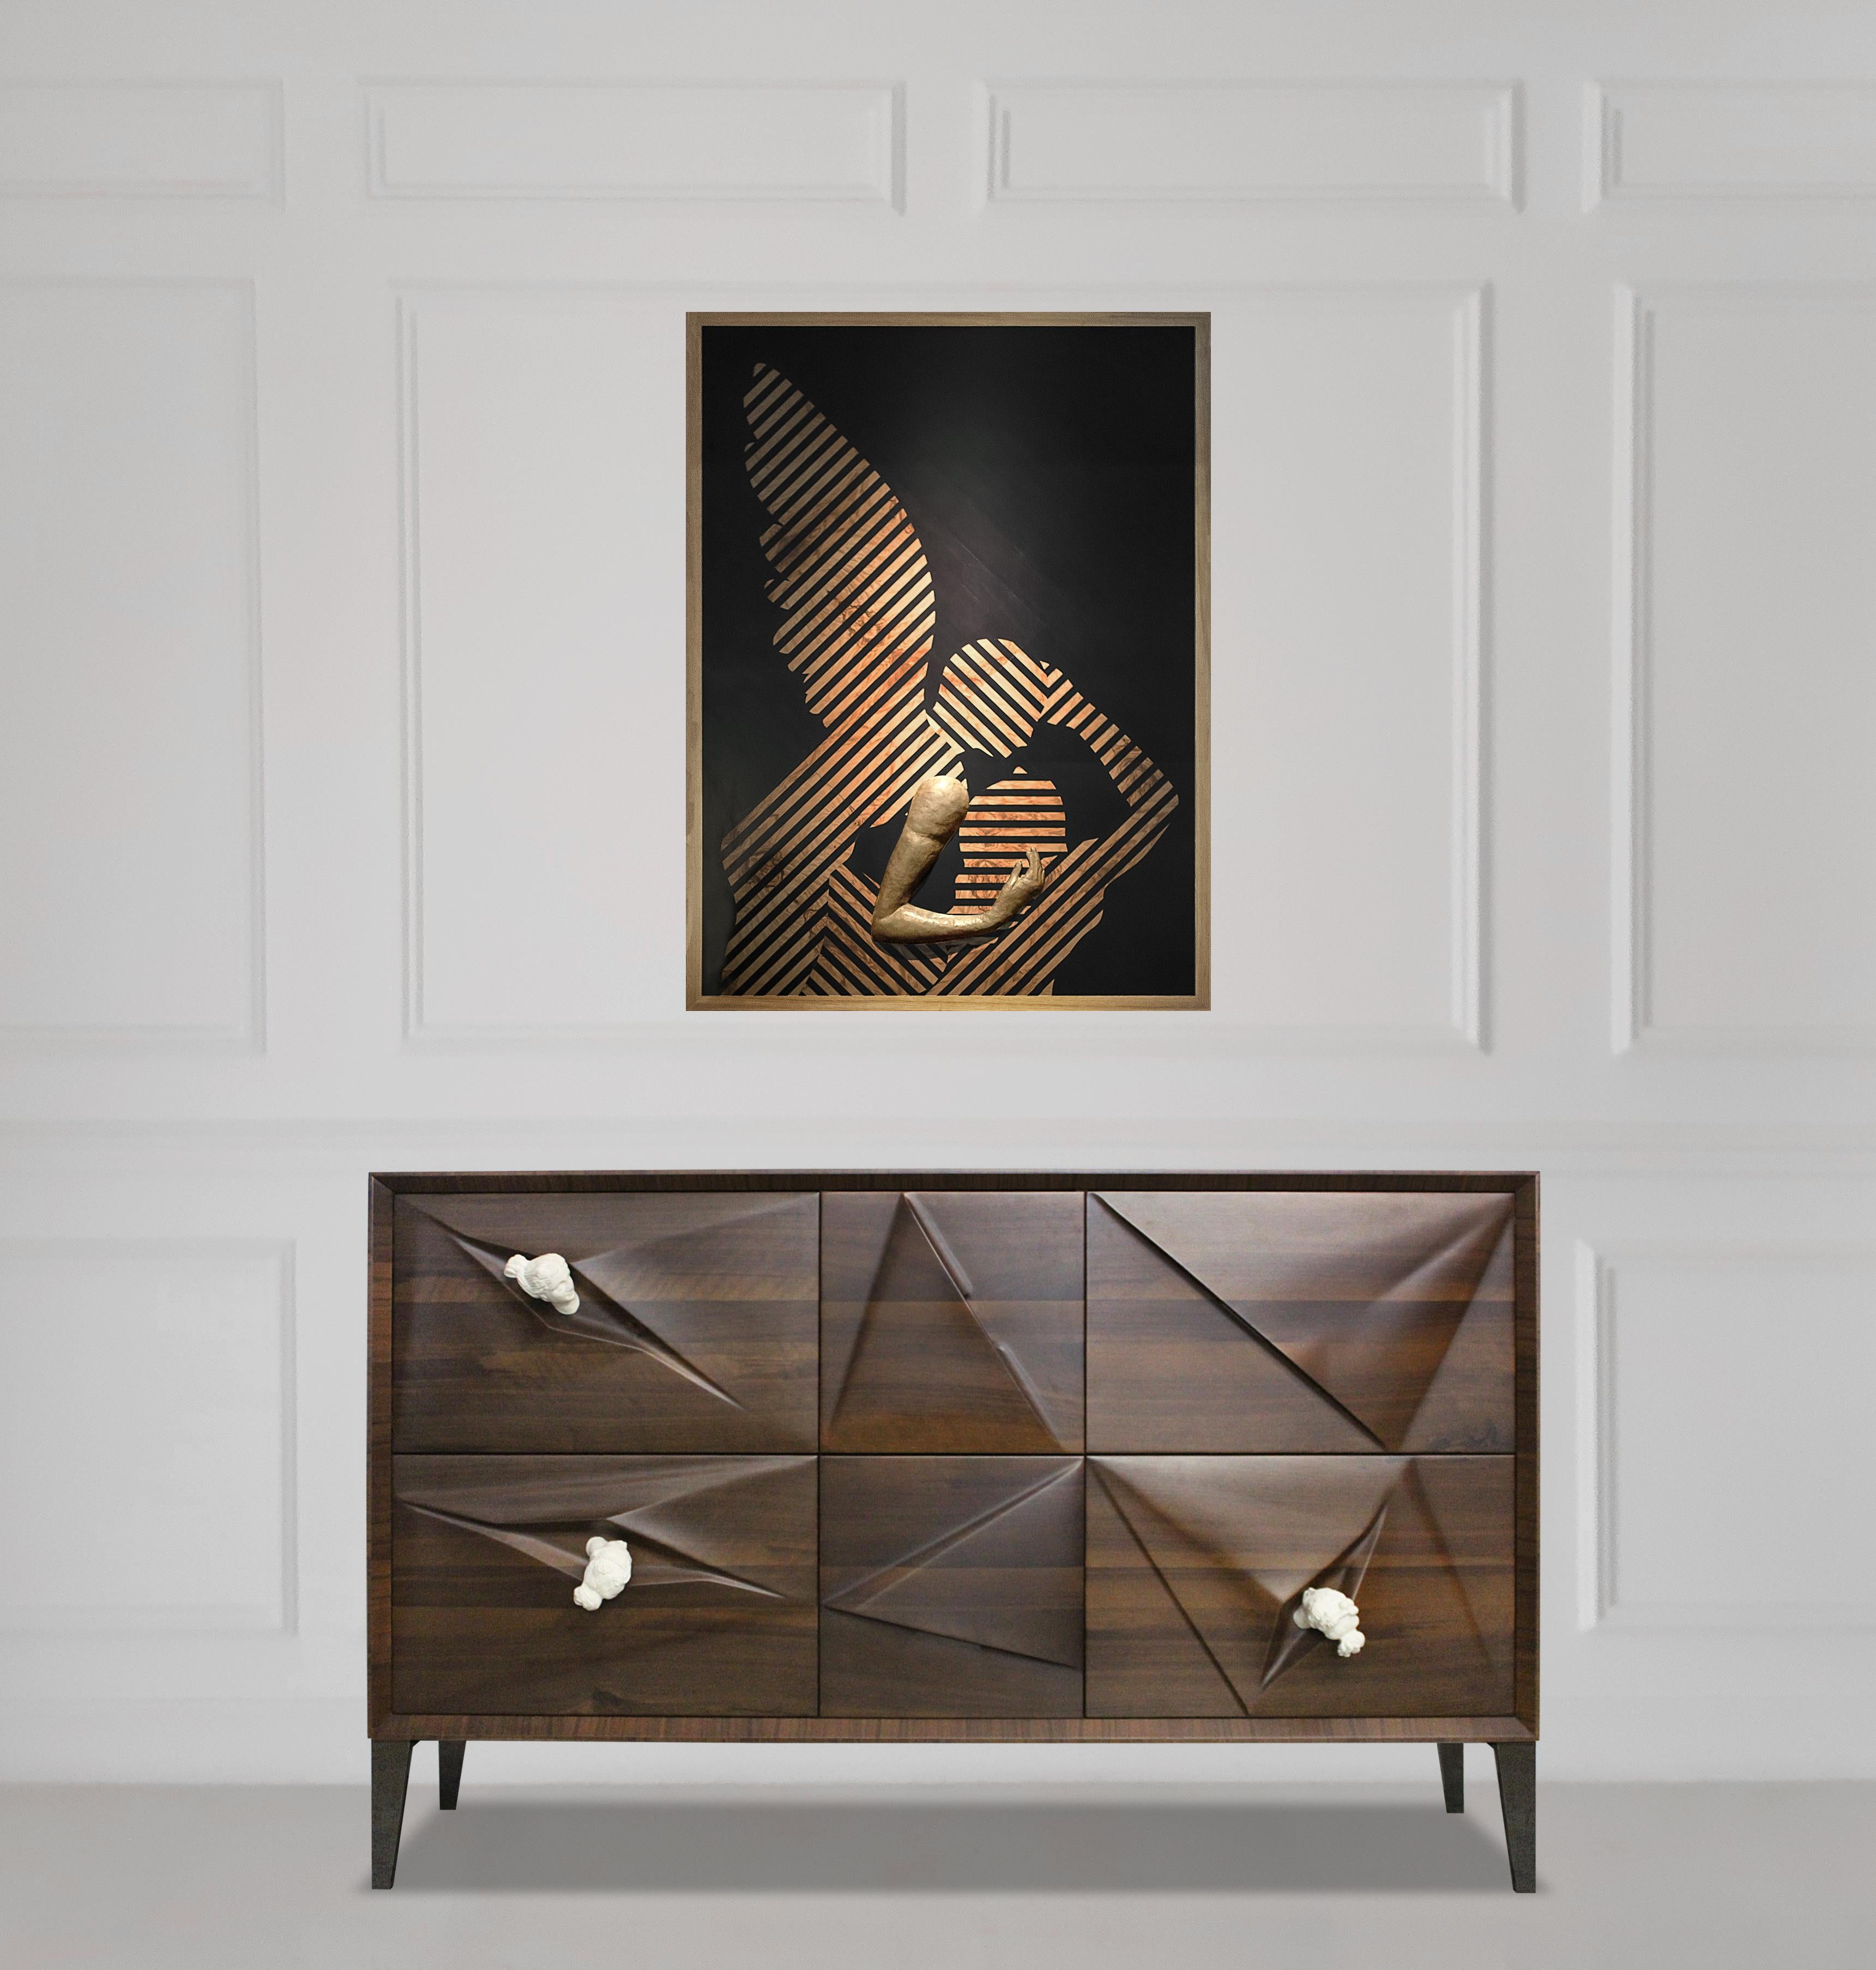 With a hug you can feel 'at home', from this reflection A-braccio was born, inspired by the sculptural group 'Amore e Psiche' by Canova. Sculpture is transformed through the art of contemporary marquetry. 

Features:
Framework of inlaid wood in